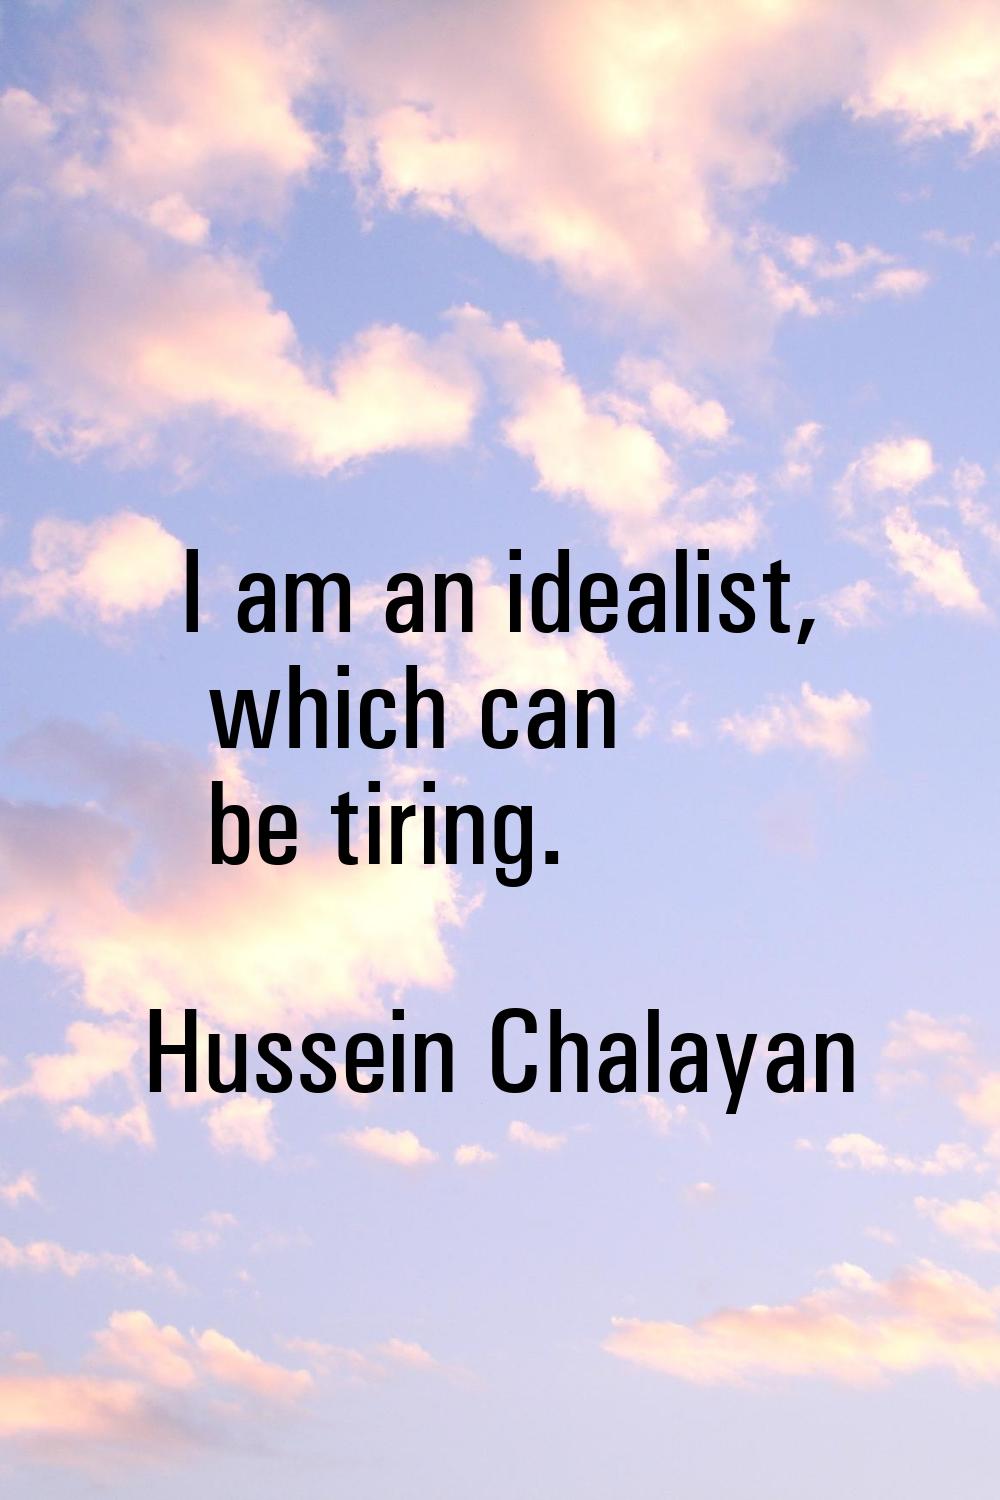 I am an idealist, which can be tiring.